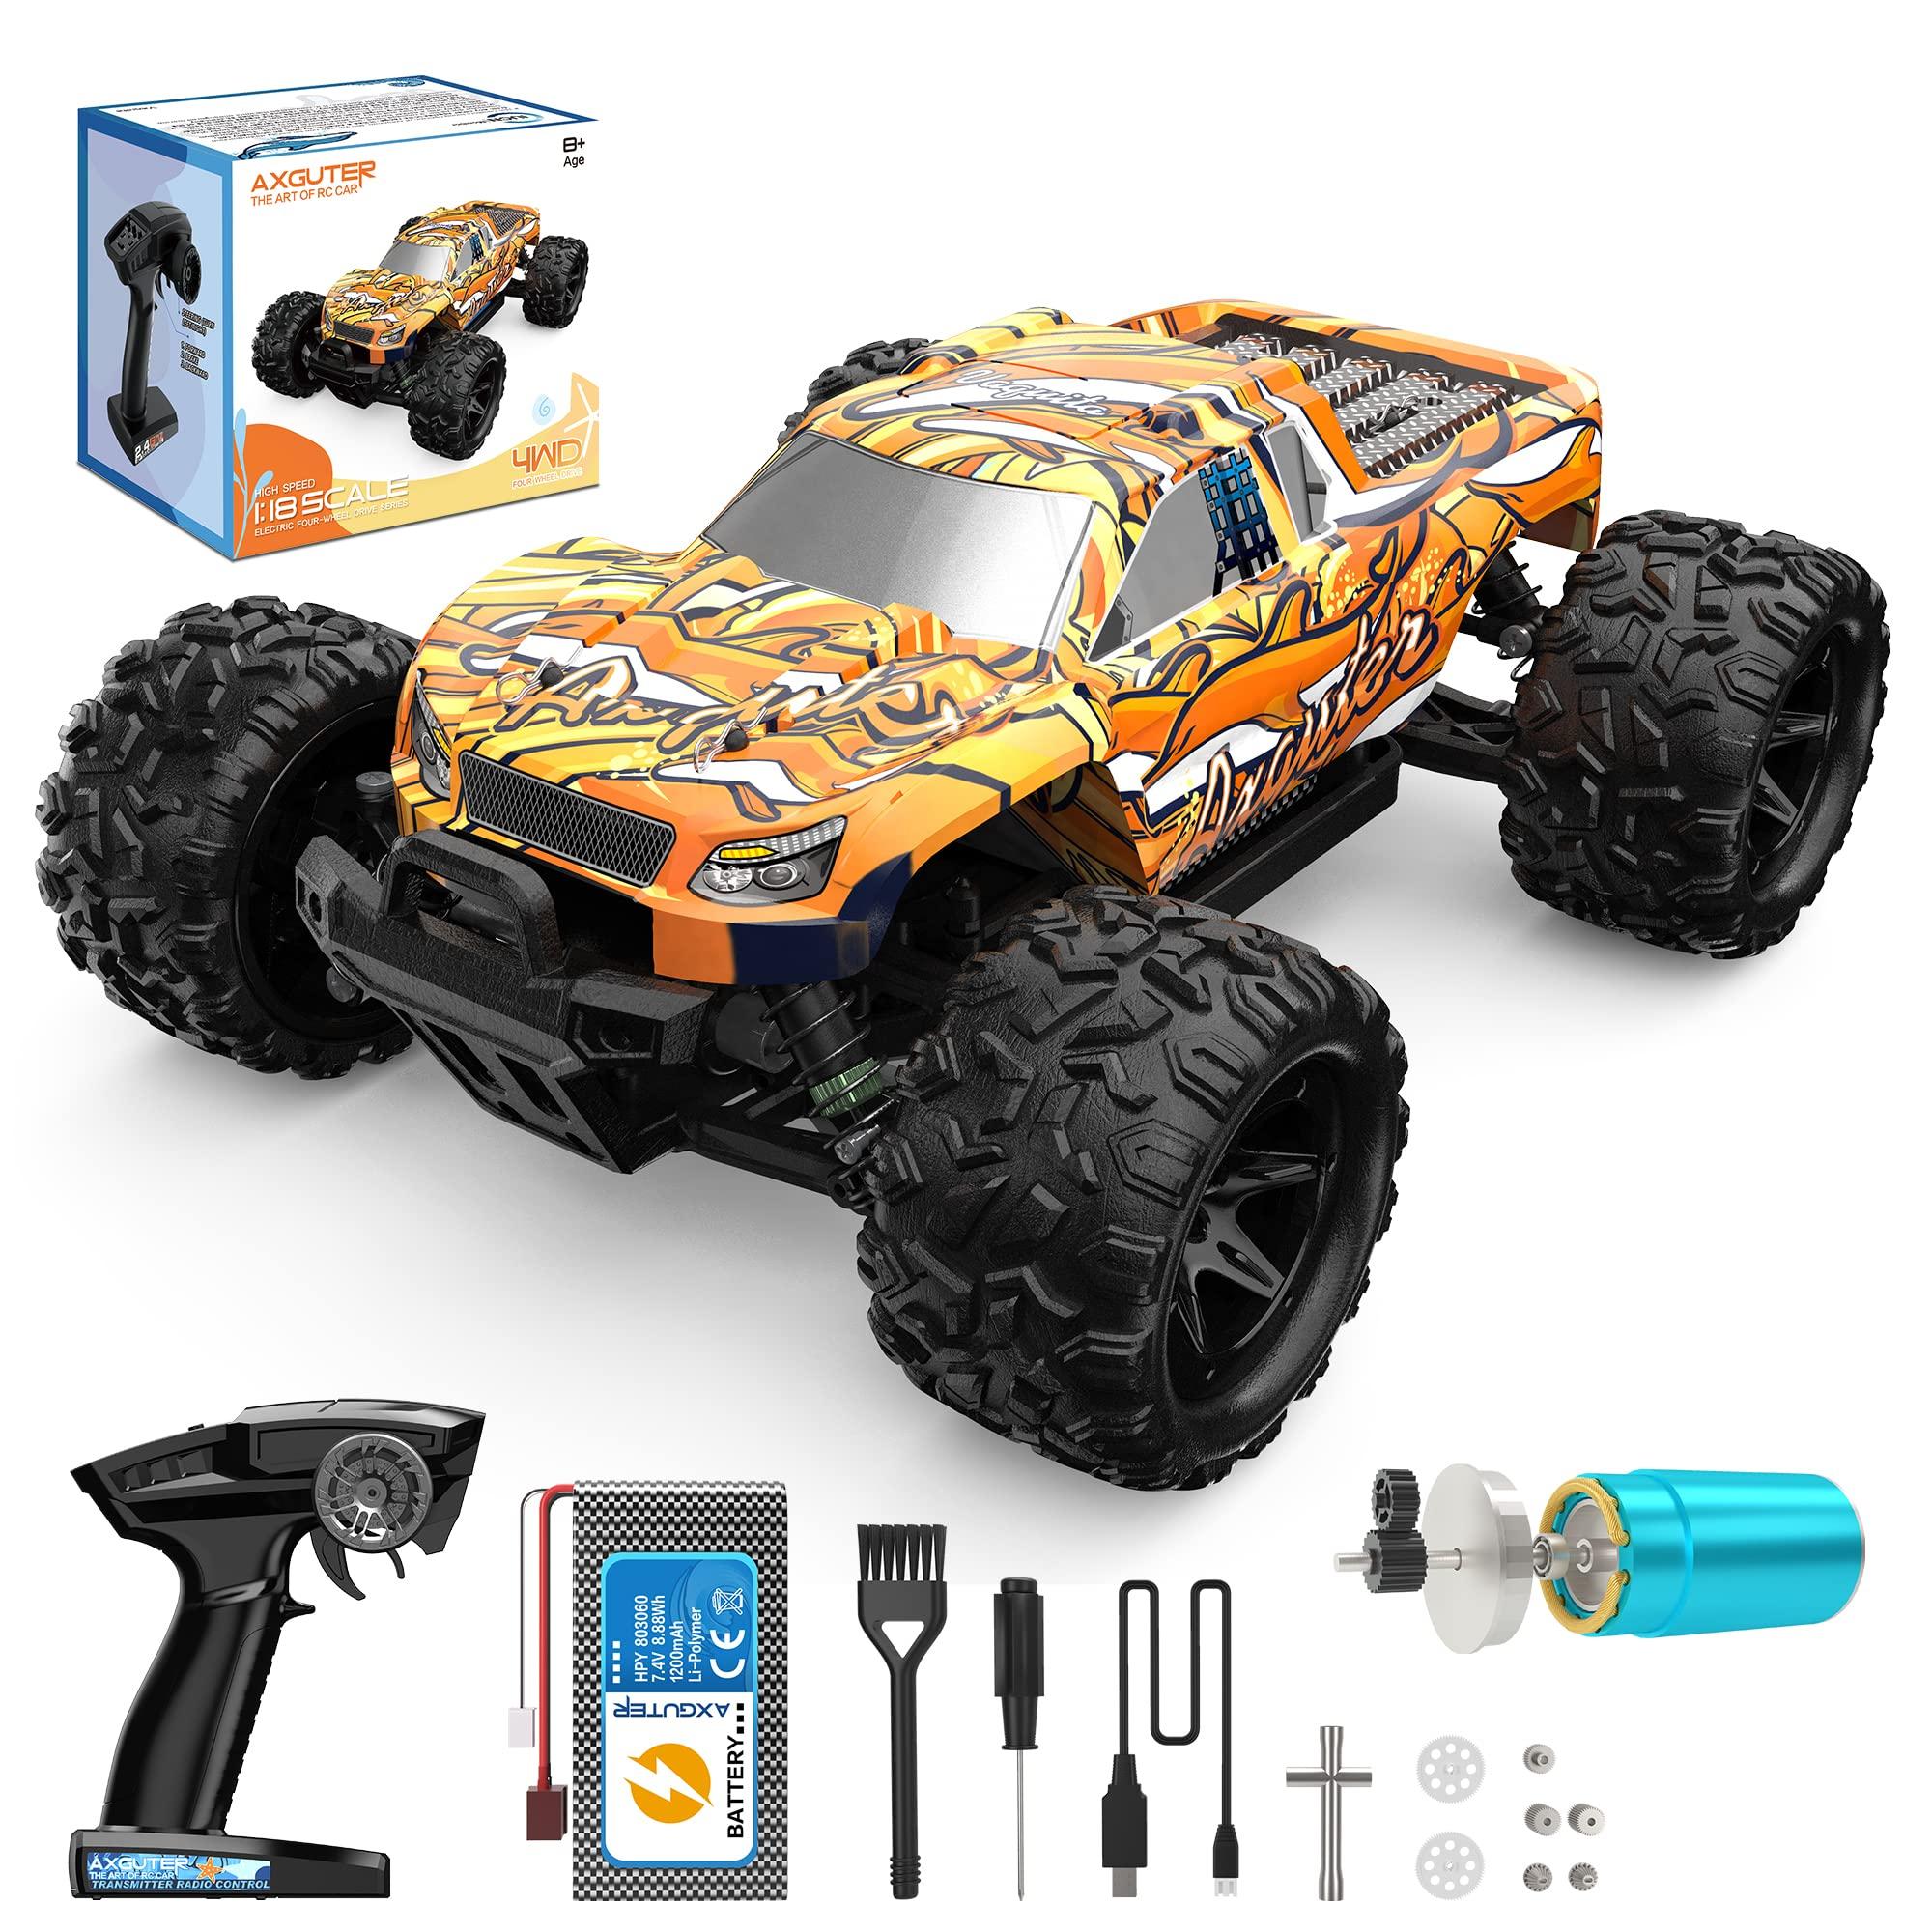 Top Rc Cars: Top High-Speed RC Cars